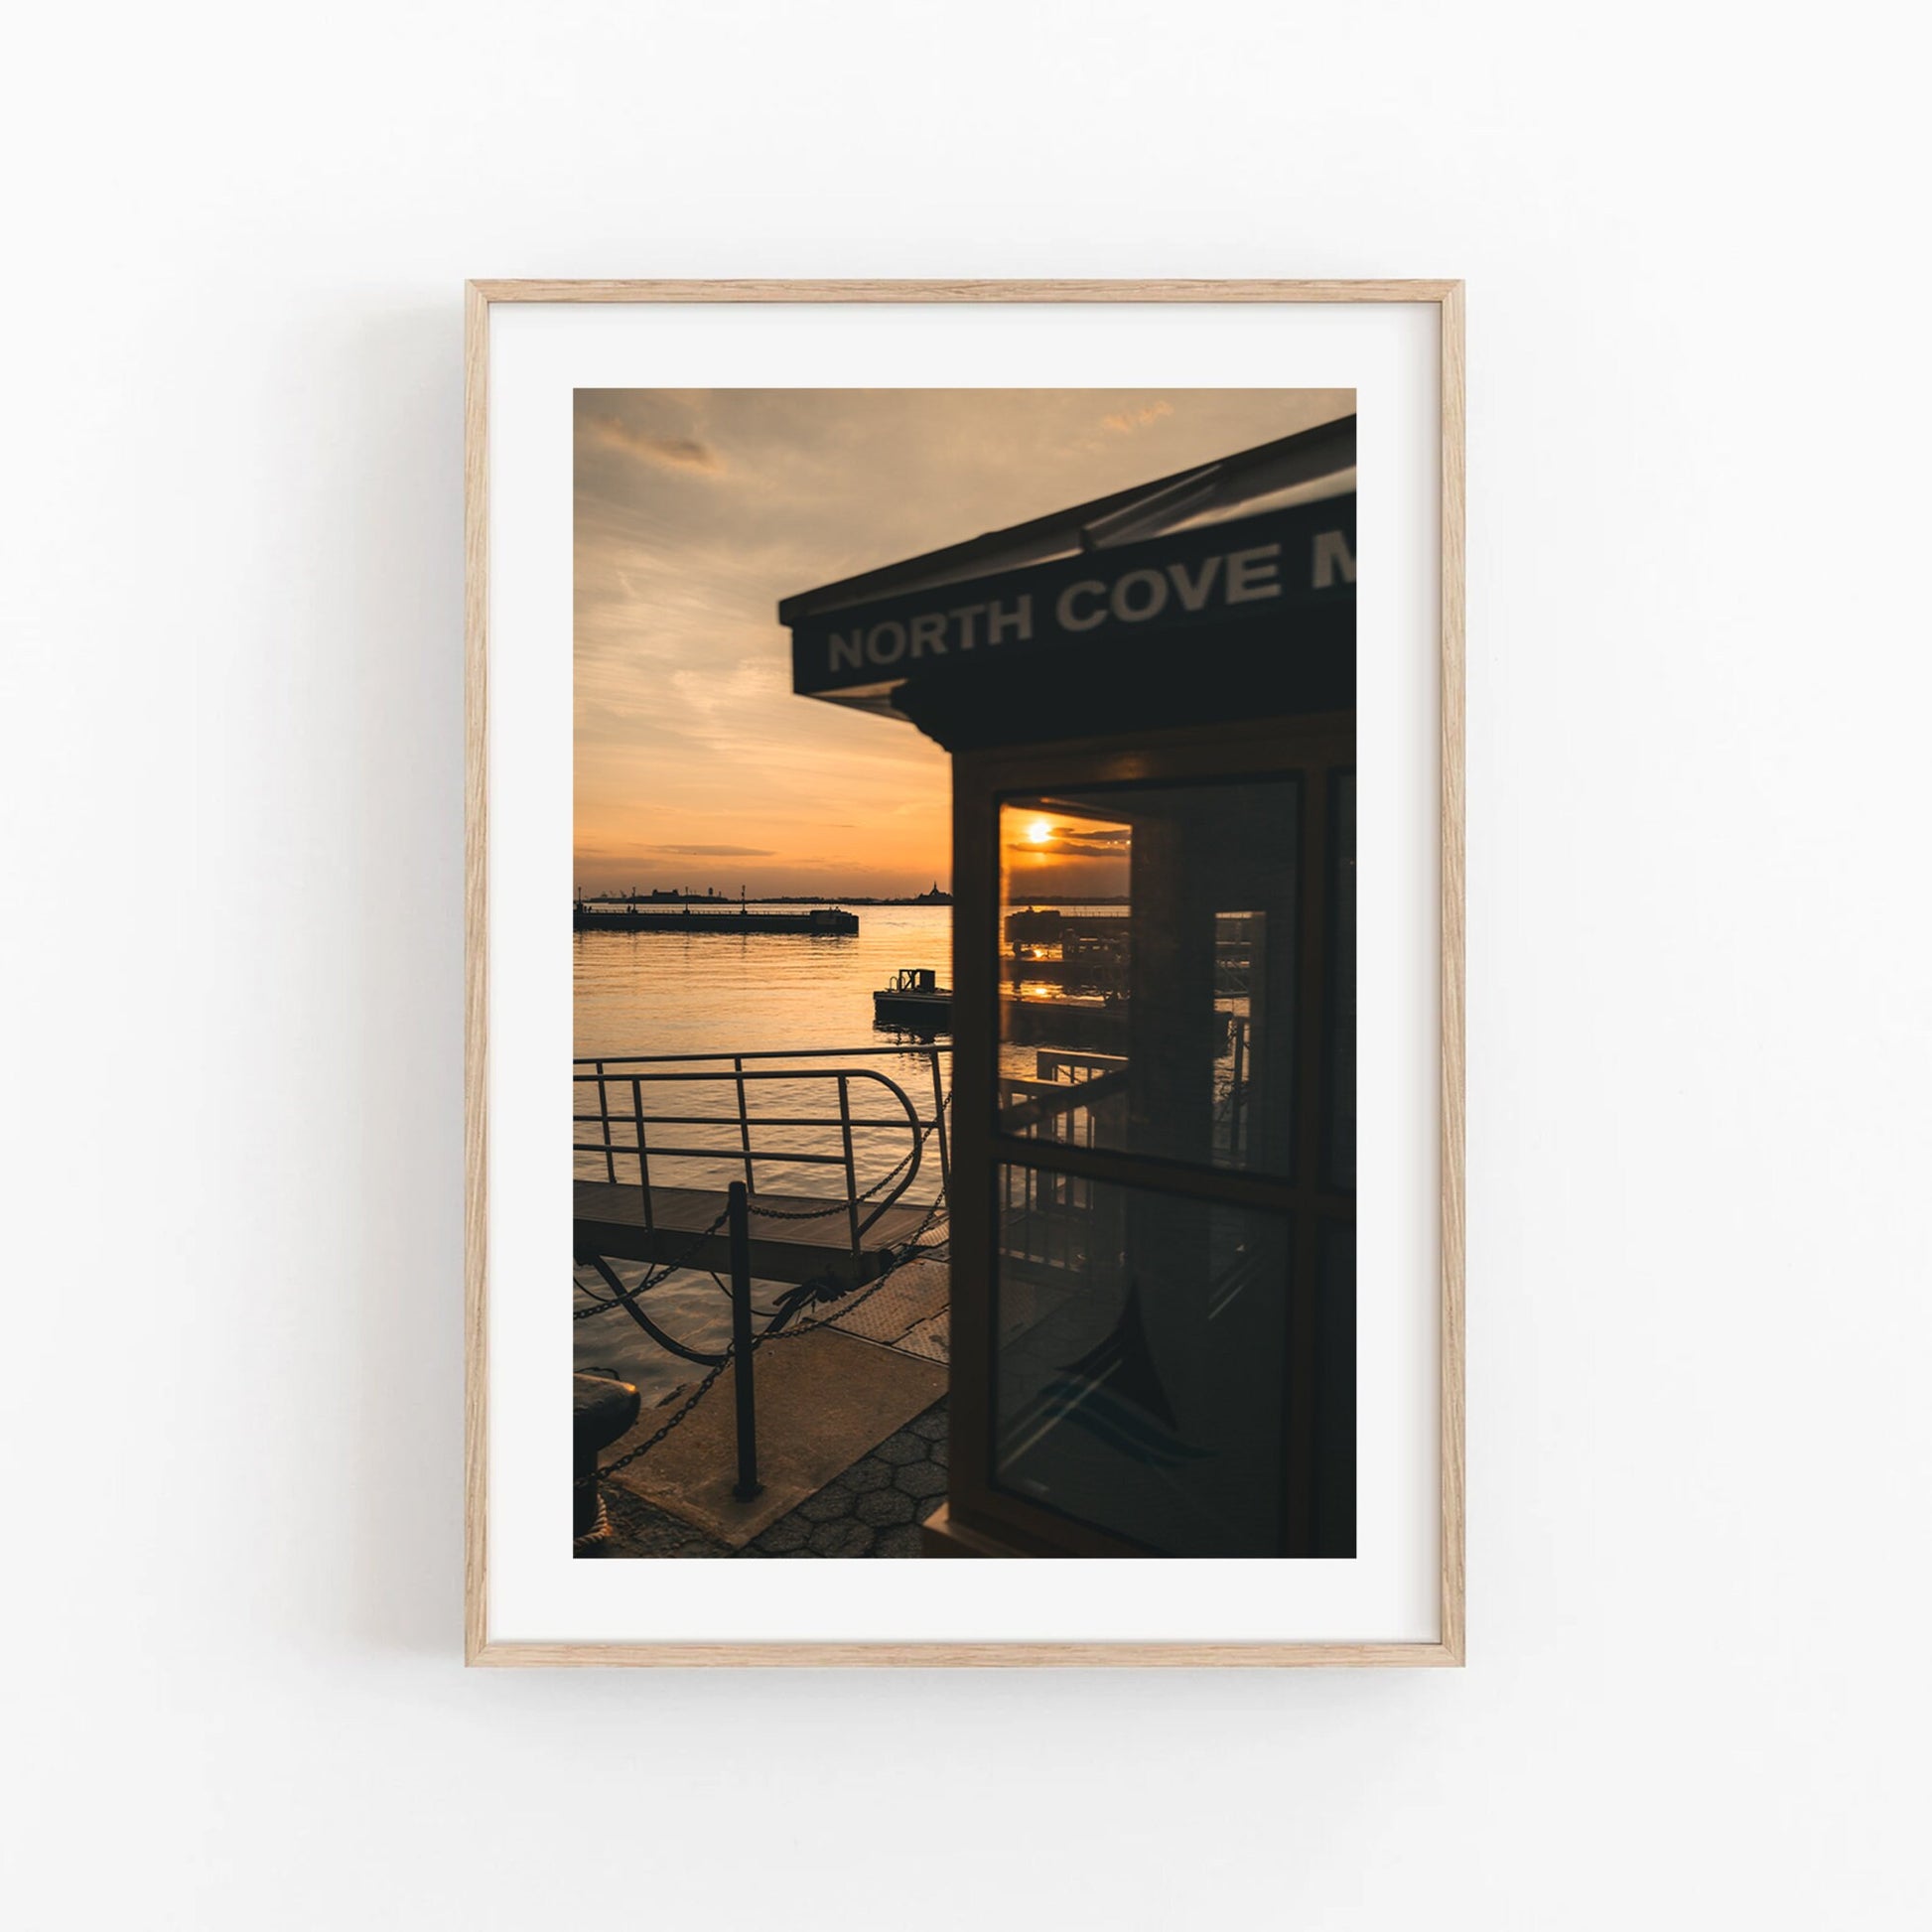 Battery Park Sunset Poster NYC Wall Art Dock Sunset Photography Framed Coastal Print Seaside Sunset Museum-quality Photo Seaside Booth Print